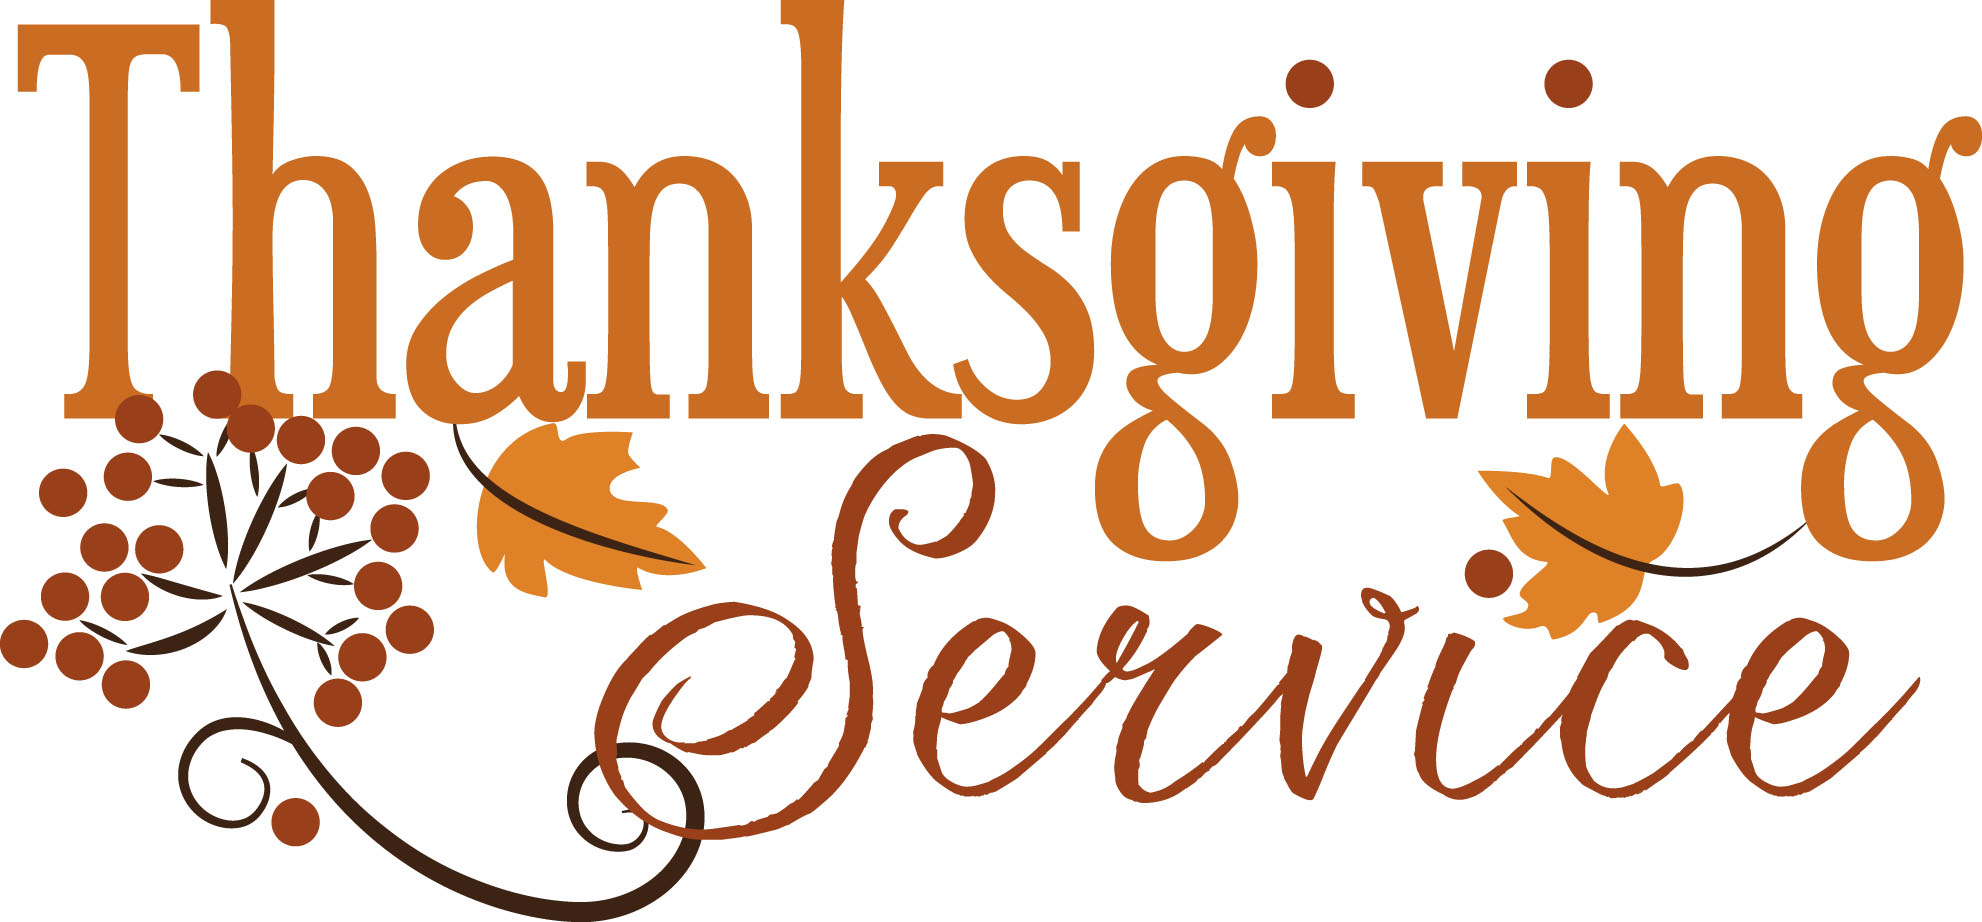 clipart thanksgiving service